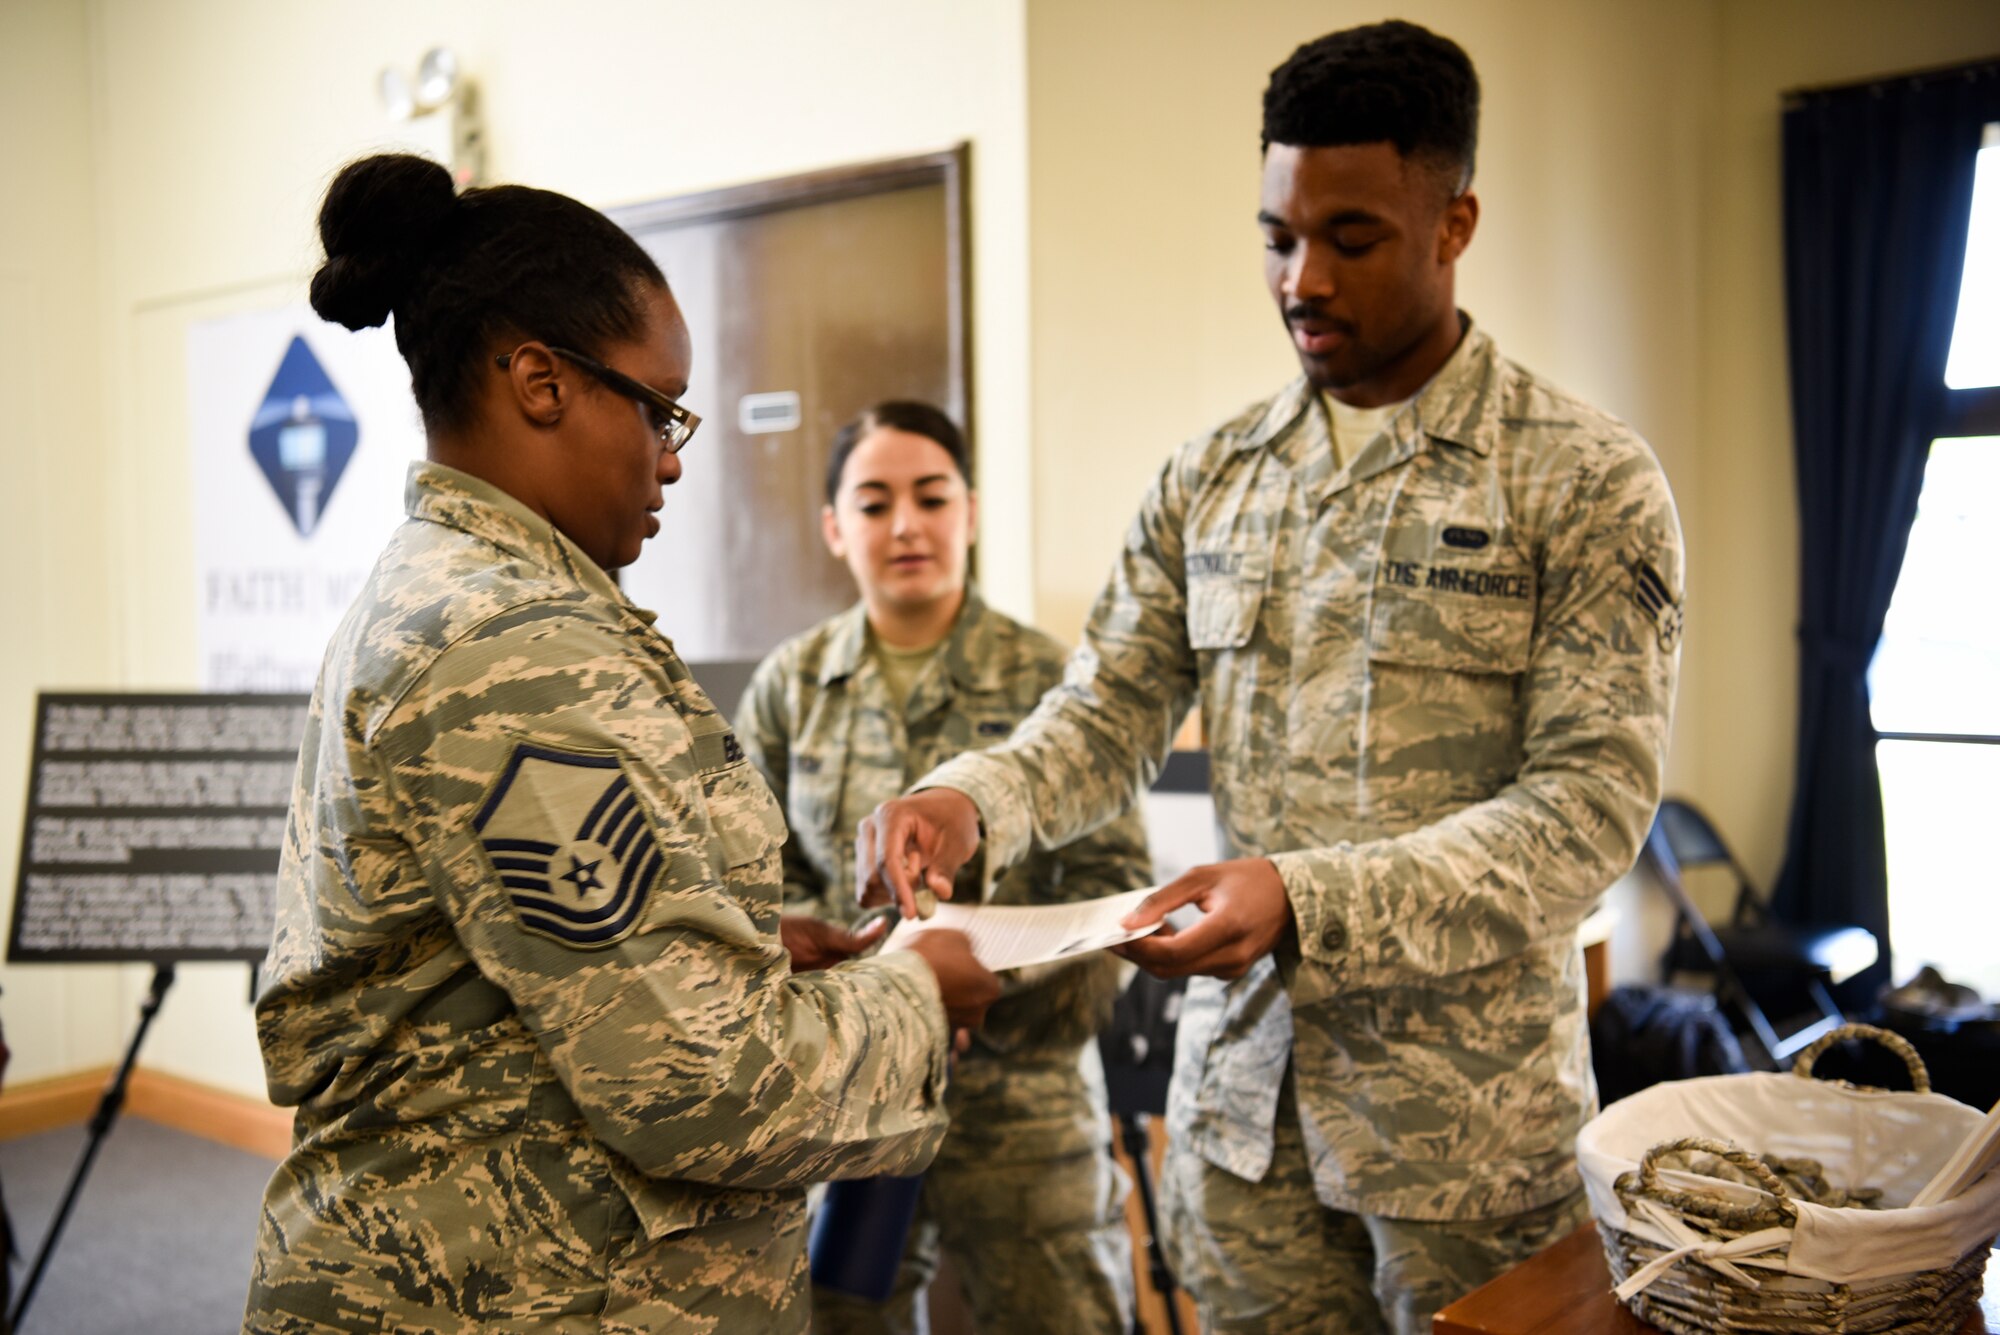 (Right) Senior Airman Jayln McDonald, 8th Communications Squadron base equipment control office technician, hands MSgt Deanna Beasley, 8th Inspector General Enterprise Management System manager, a pebble and a biographical card on a Holocaust victim prior to a remembrance ceremony May 2, 2019 on Kunsan Air Base, Republic of Korea. The ceremony is part of the national Days of Remembrance observance established by Congress to commemorate the Holocaust. This year, it is observed from April 28 through May 5. (U.S. Air Force photo by Capt. Remoshay Nelson)